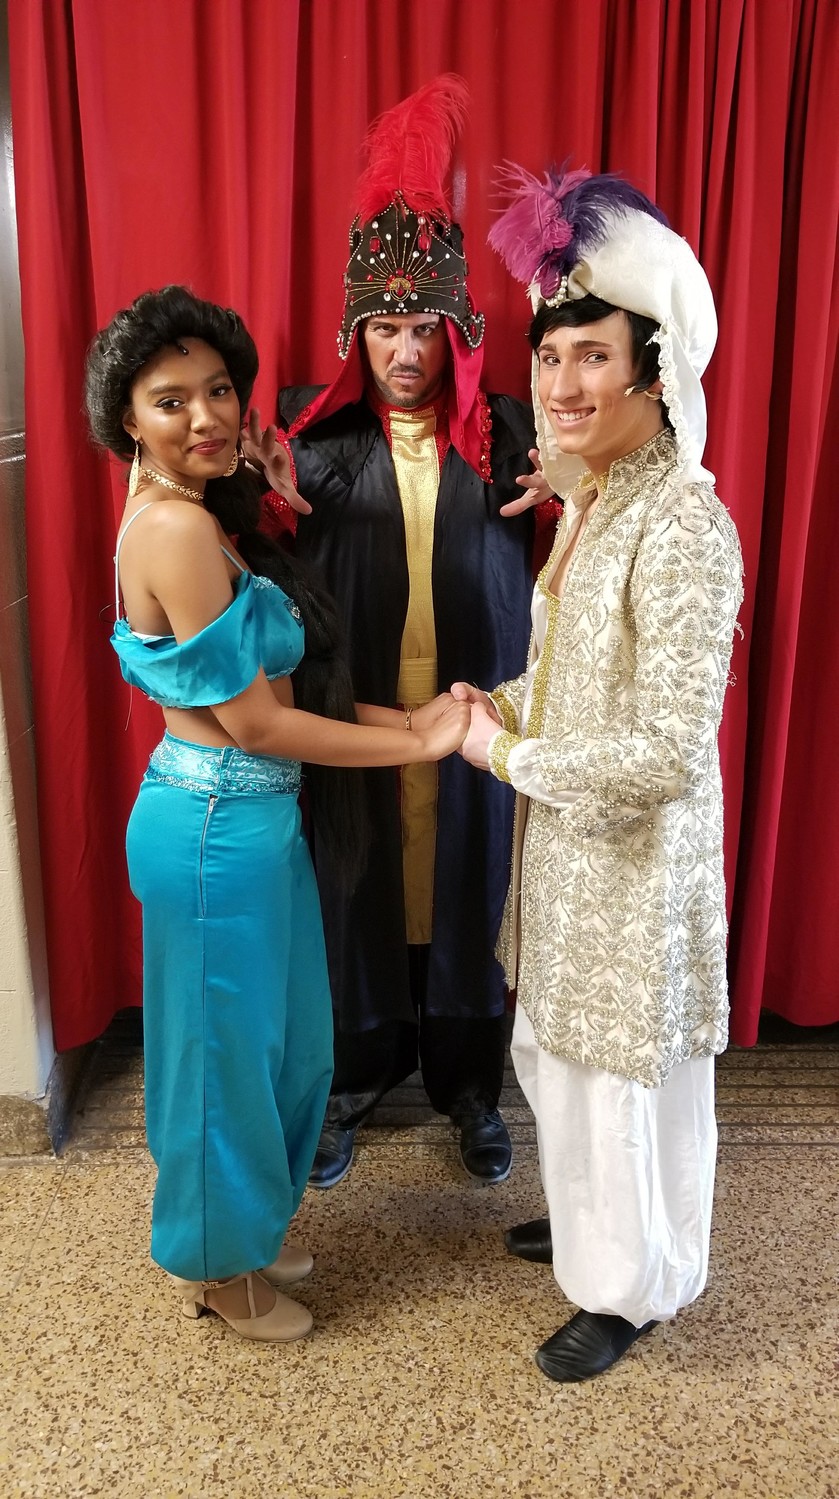 Journey to the kingdom of Agrabah in BroadHollow Theatre Company's staging of "Aladdin" on Saturday.